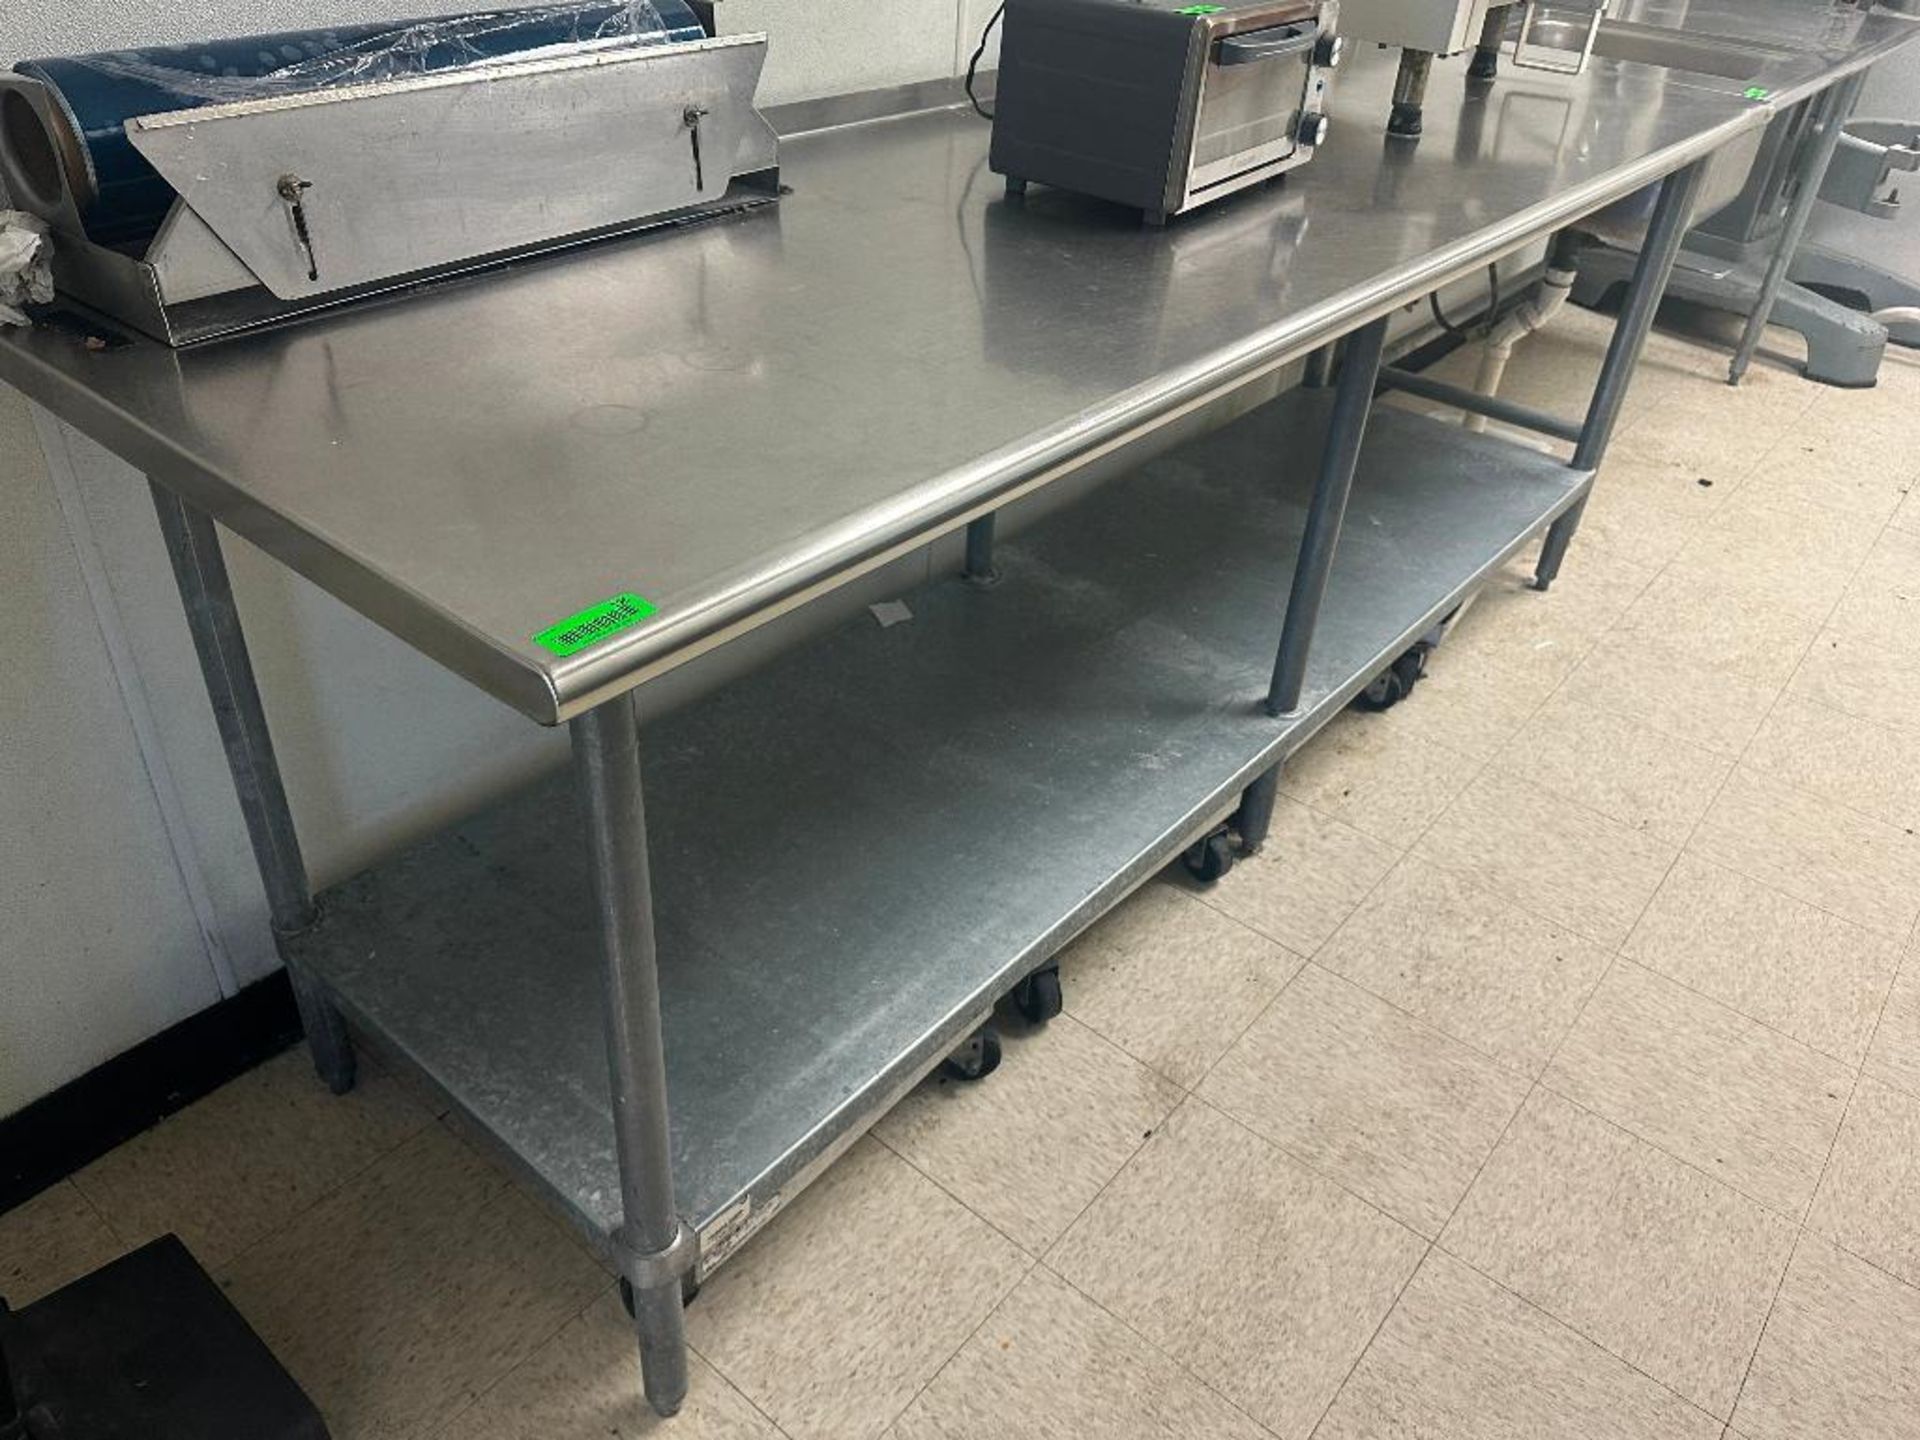 DESCRIPTION 8' X 30" STAINLESS TABLE W/ GALVIN ZED UNDER SHELF. ADDITIONAL INFORMATION CONTENTS ARE